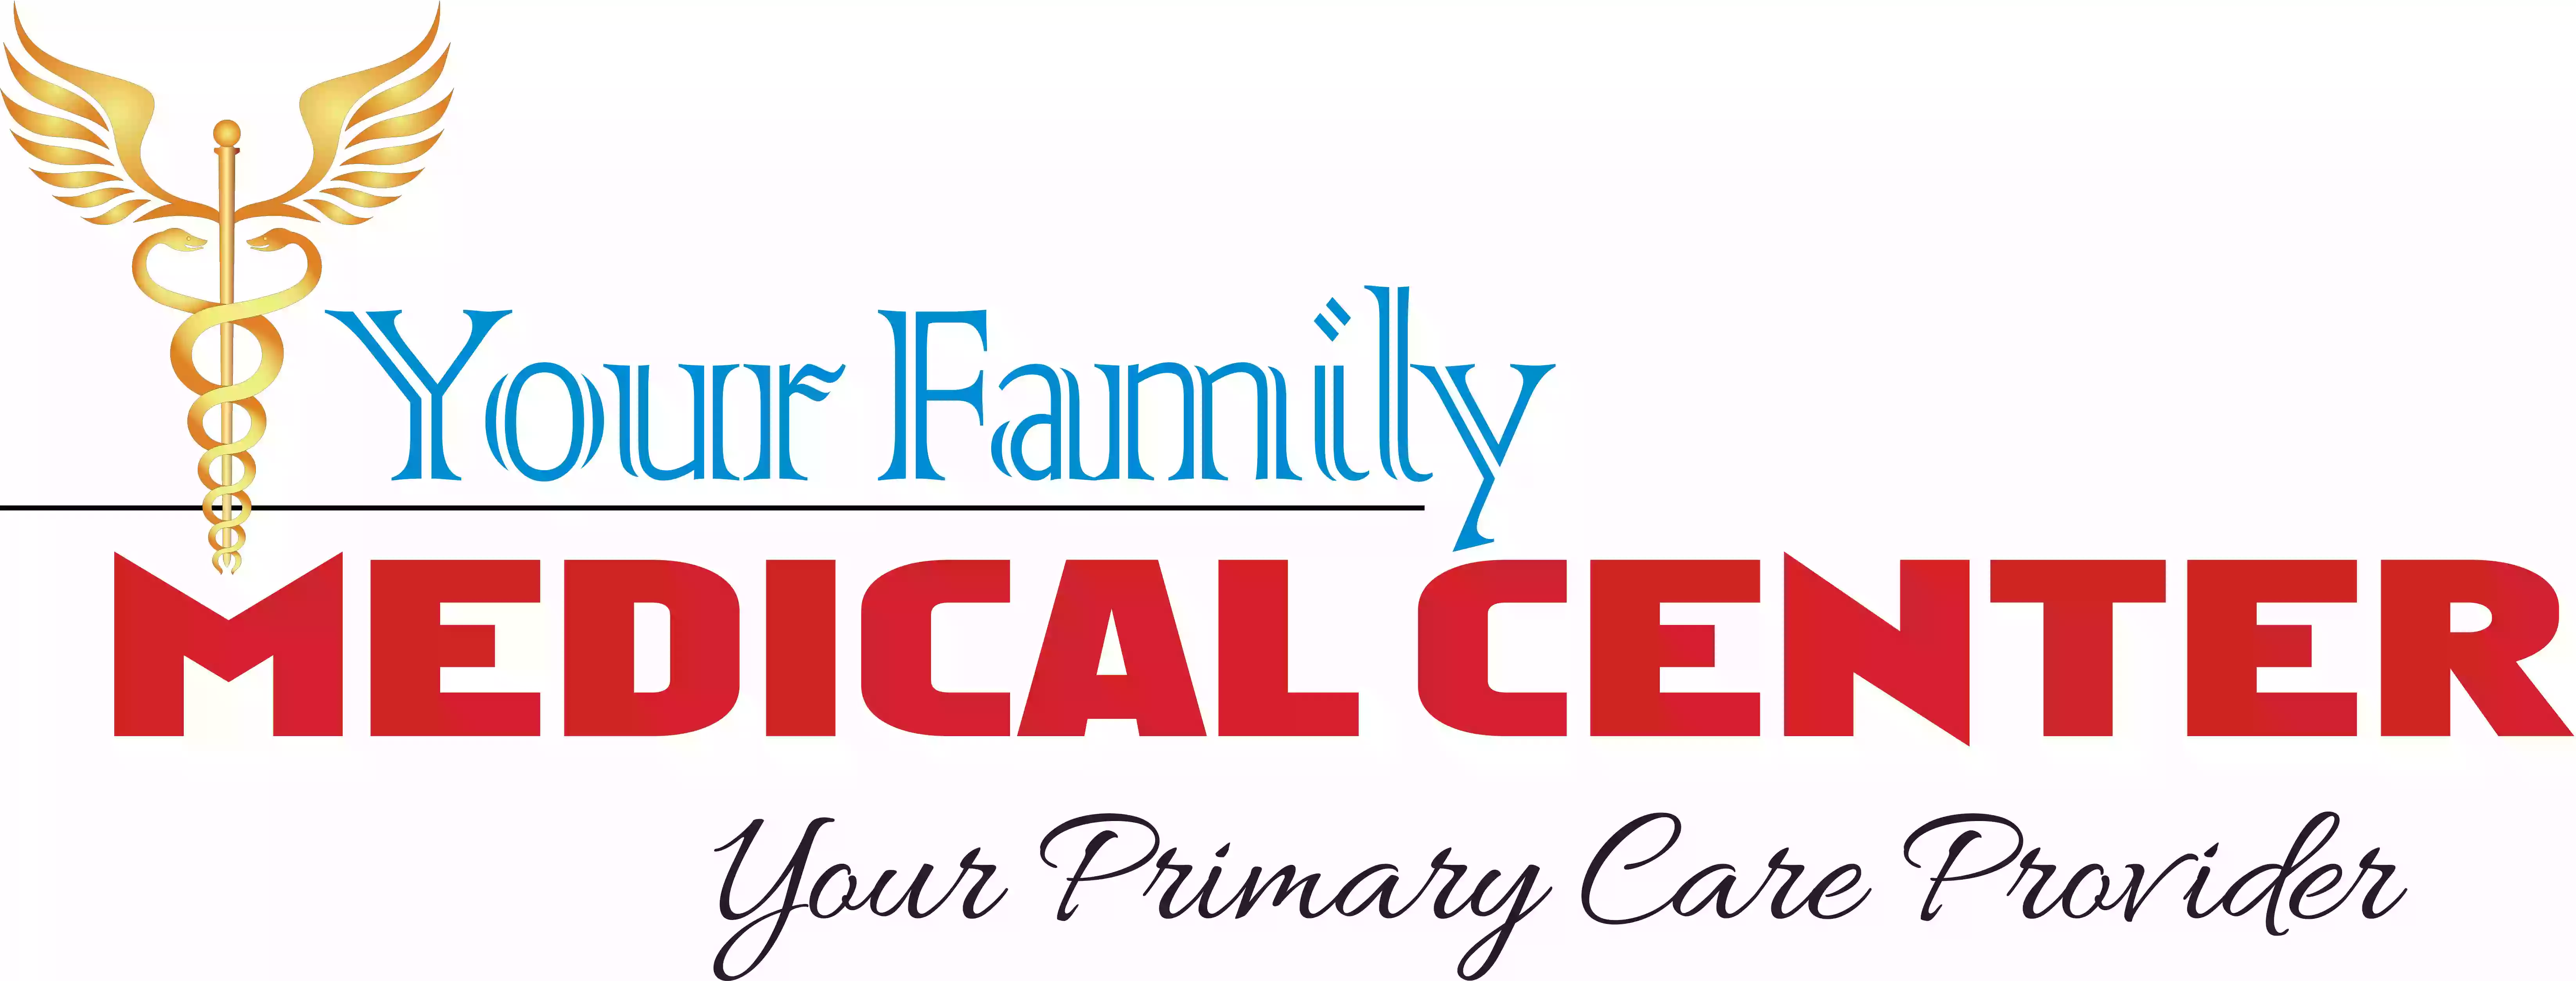 Your Family Medical Center